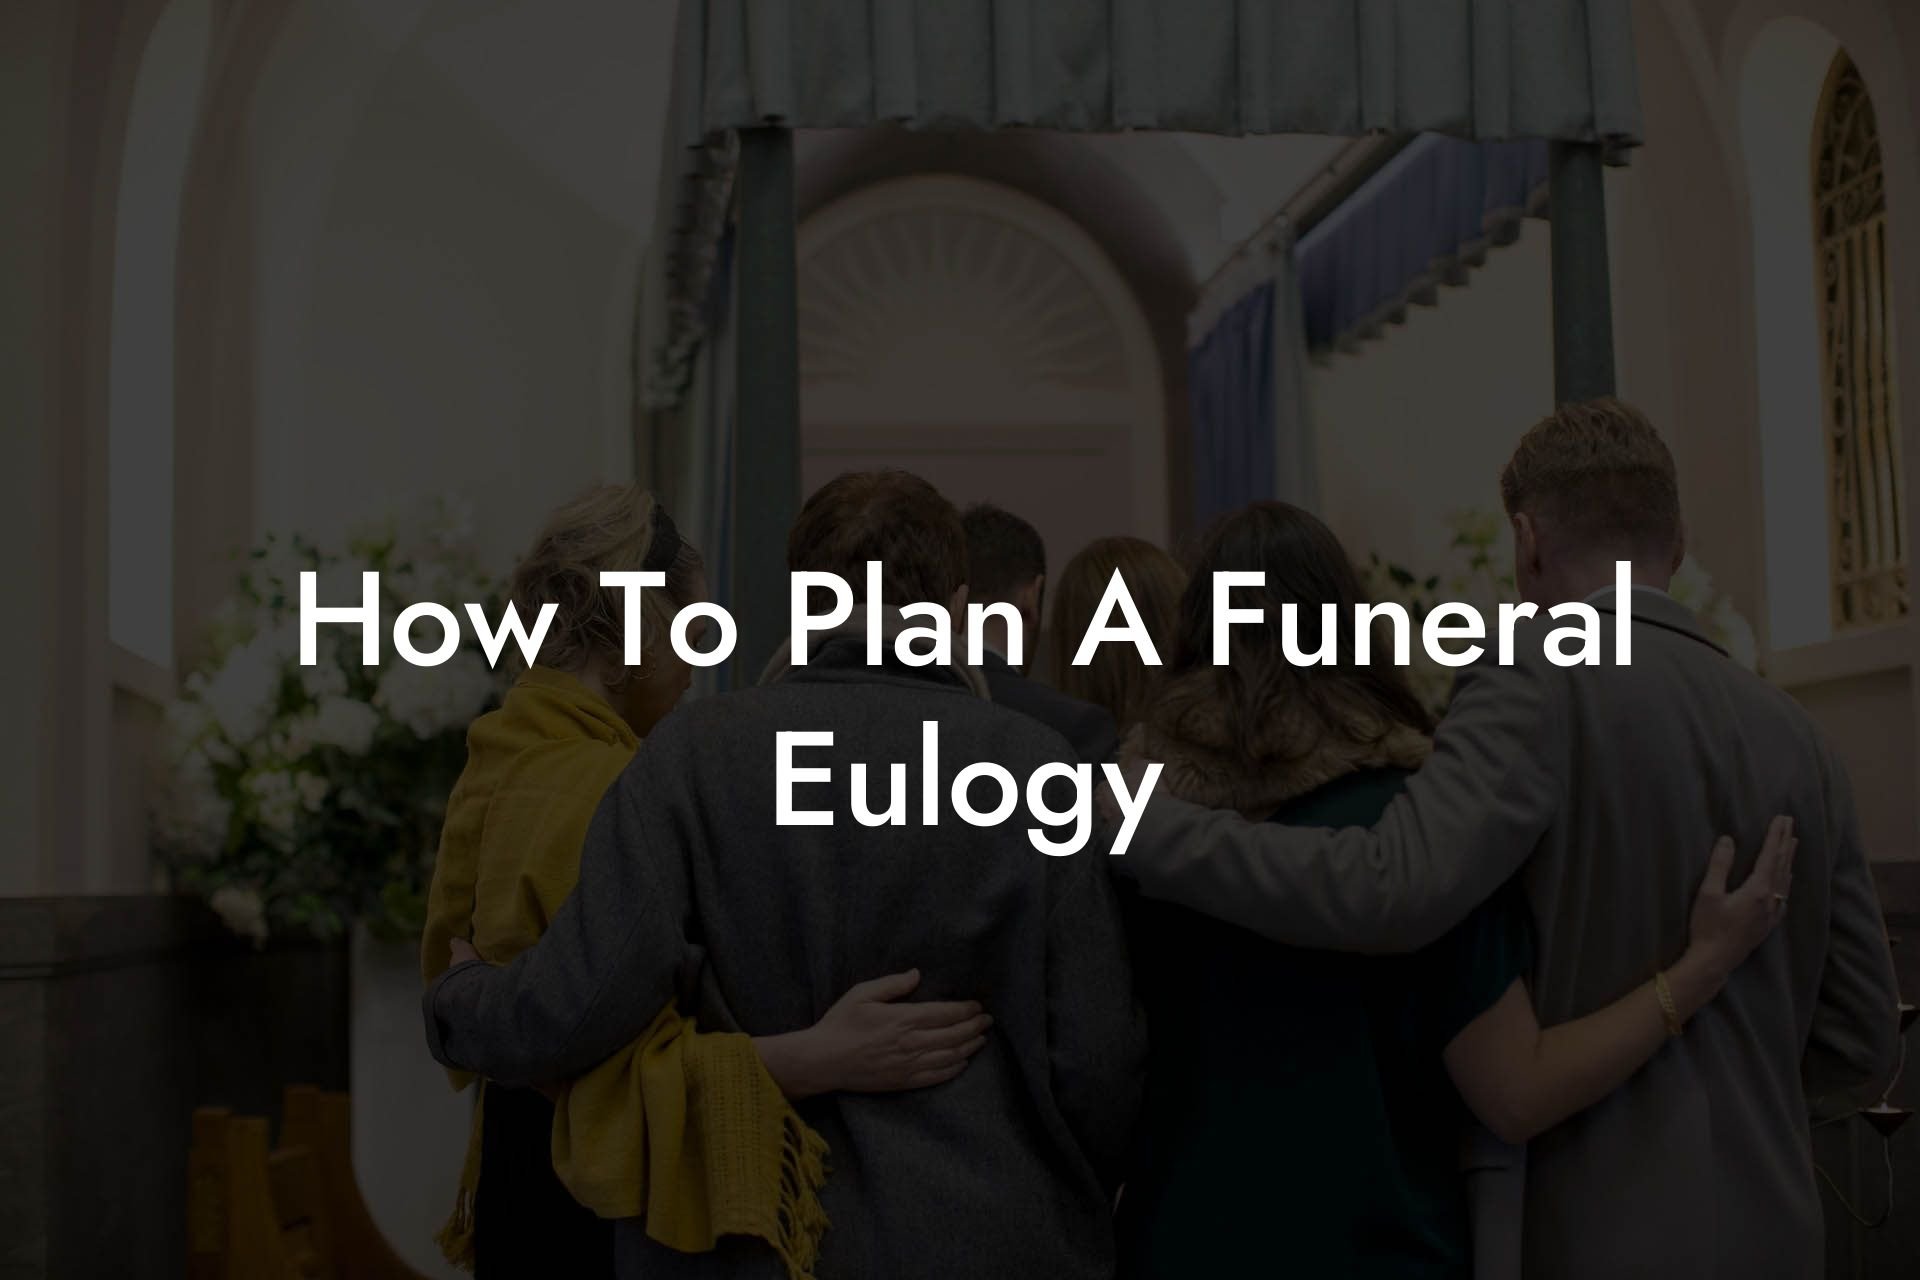 How To Plan A Funeral Eulogy